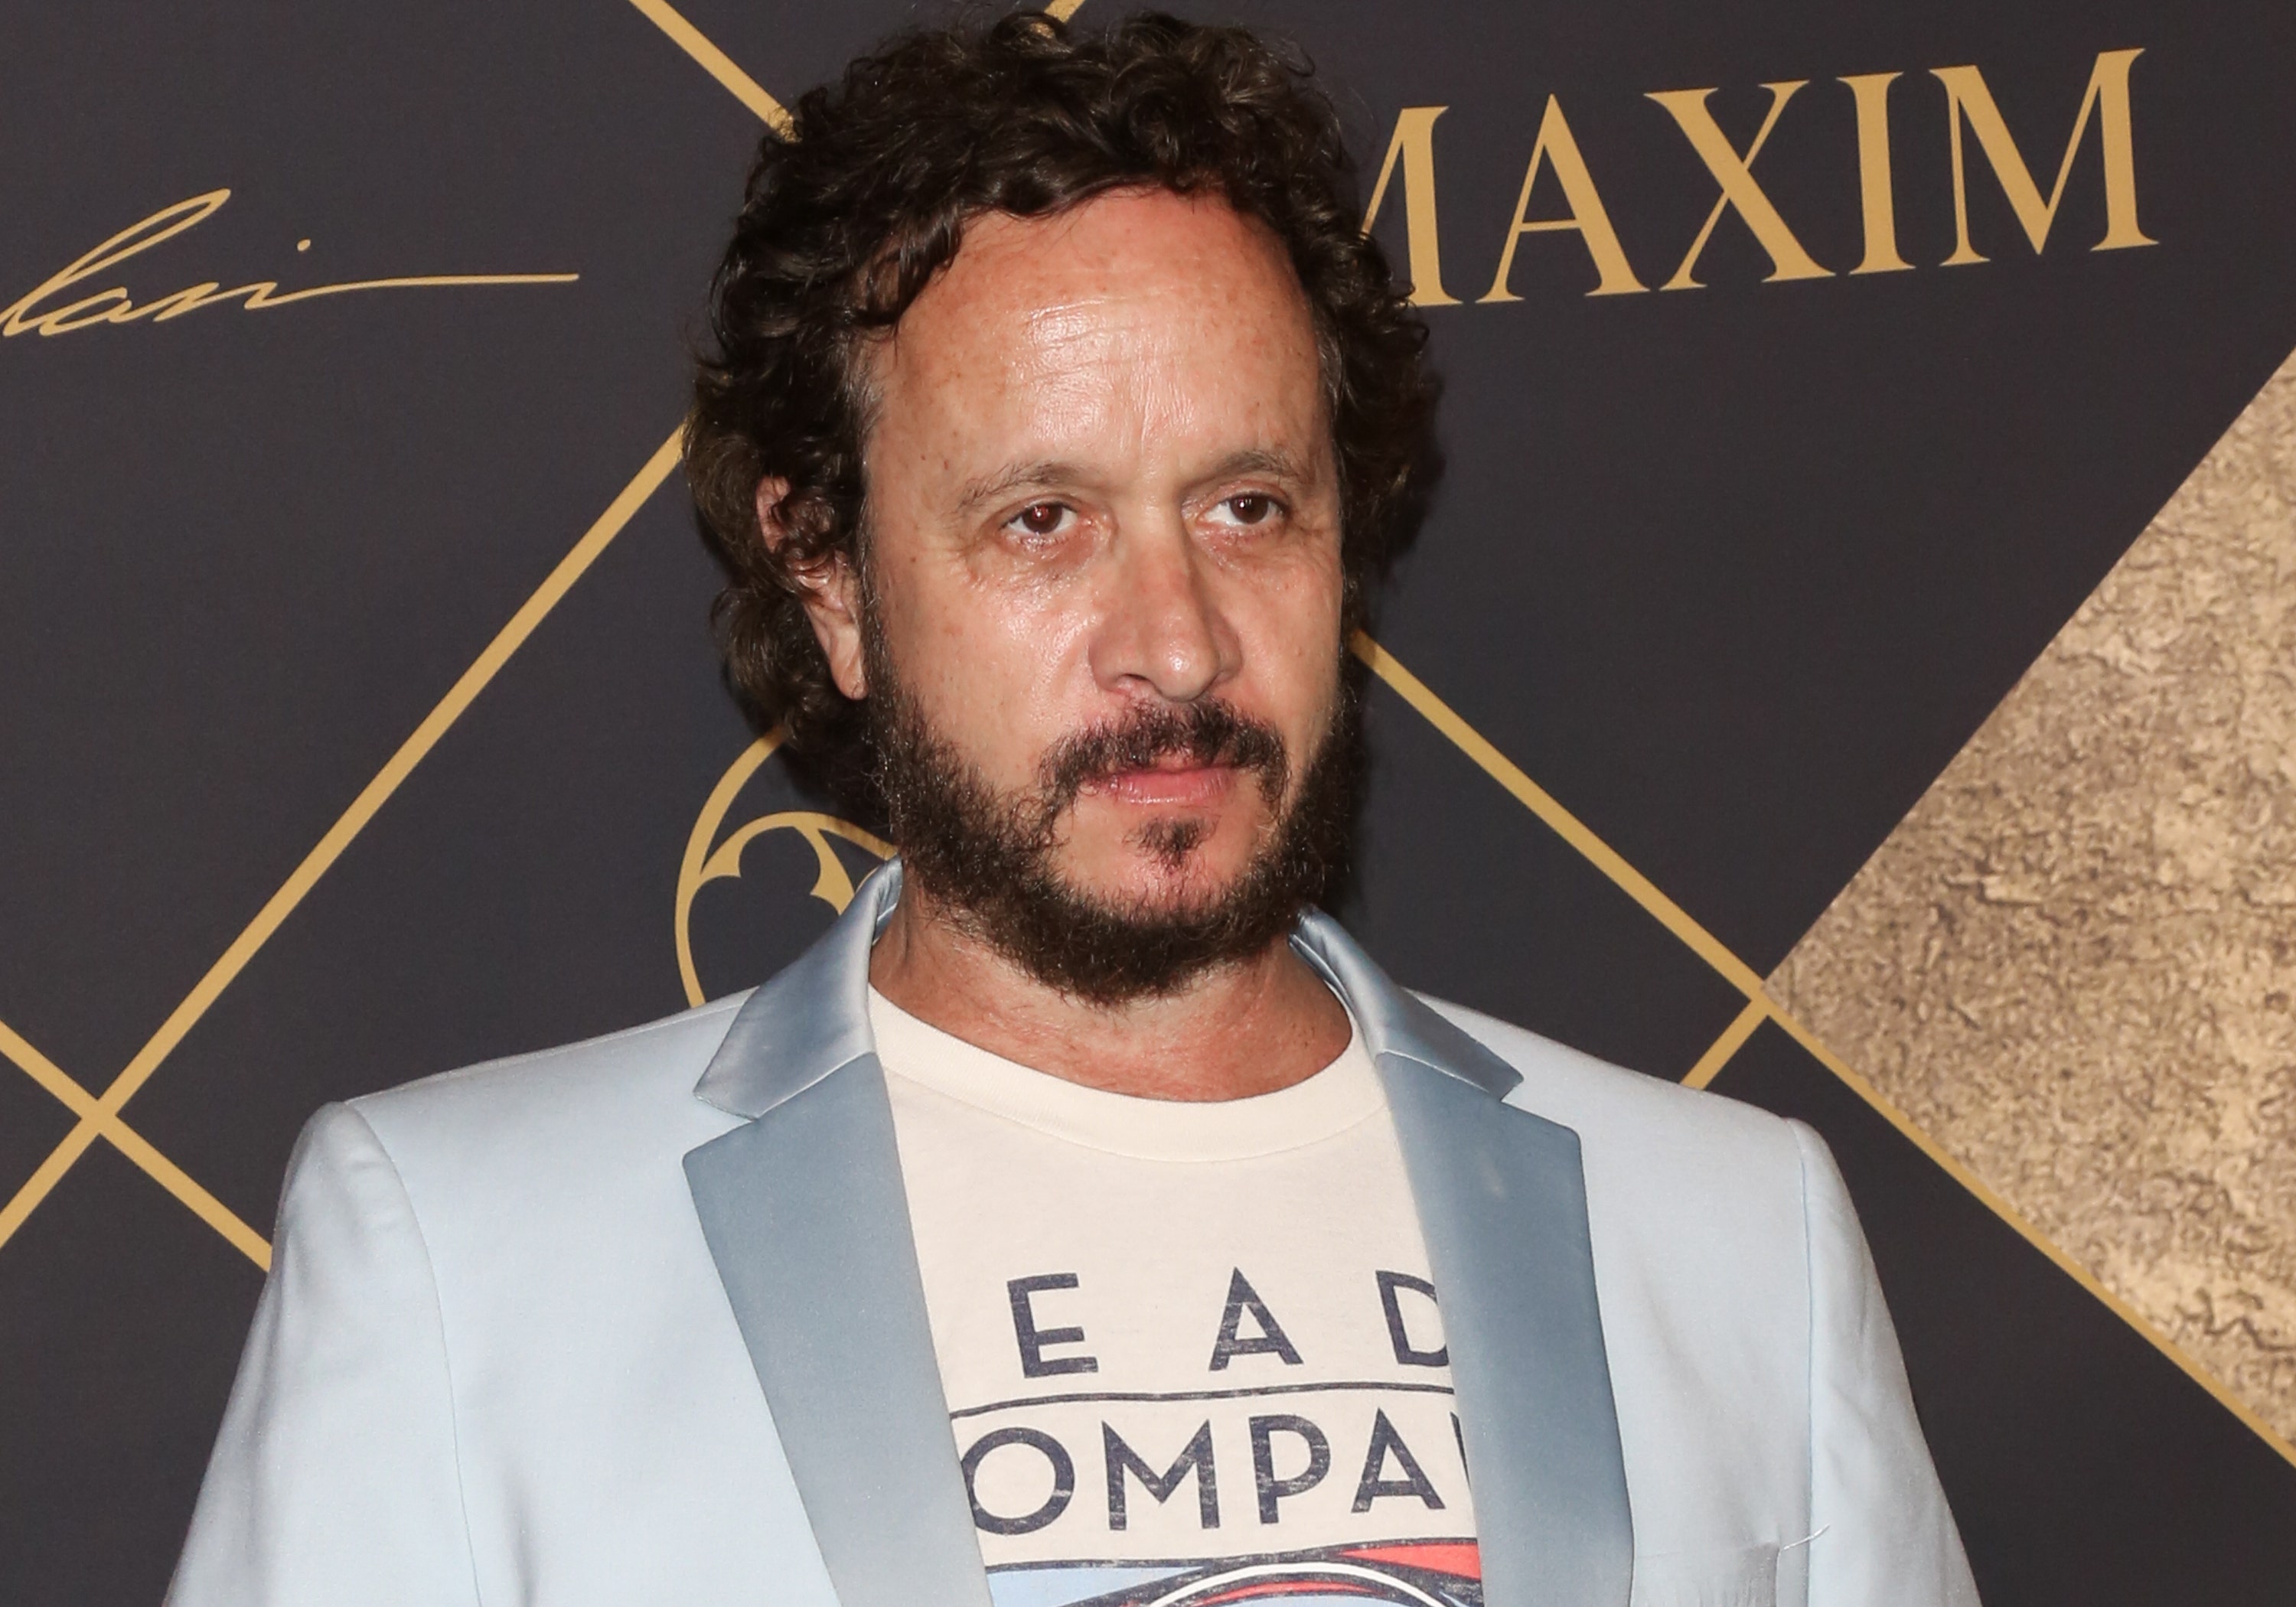 Pauly Shore on Jimmy Kimmel's Oscar jab and how he really felt about it